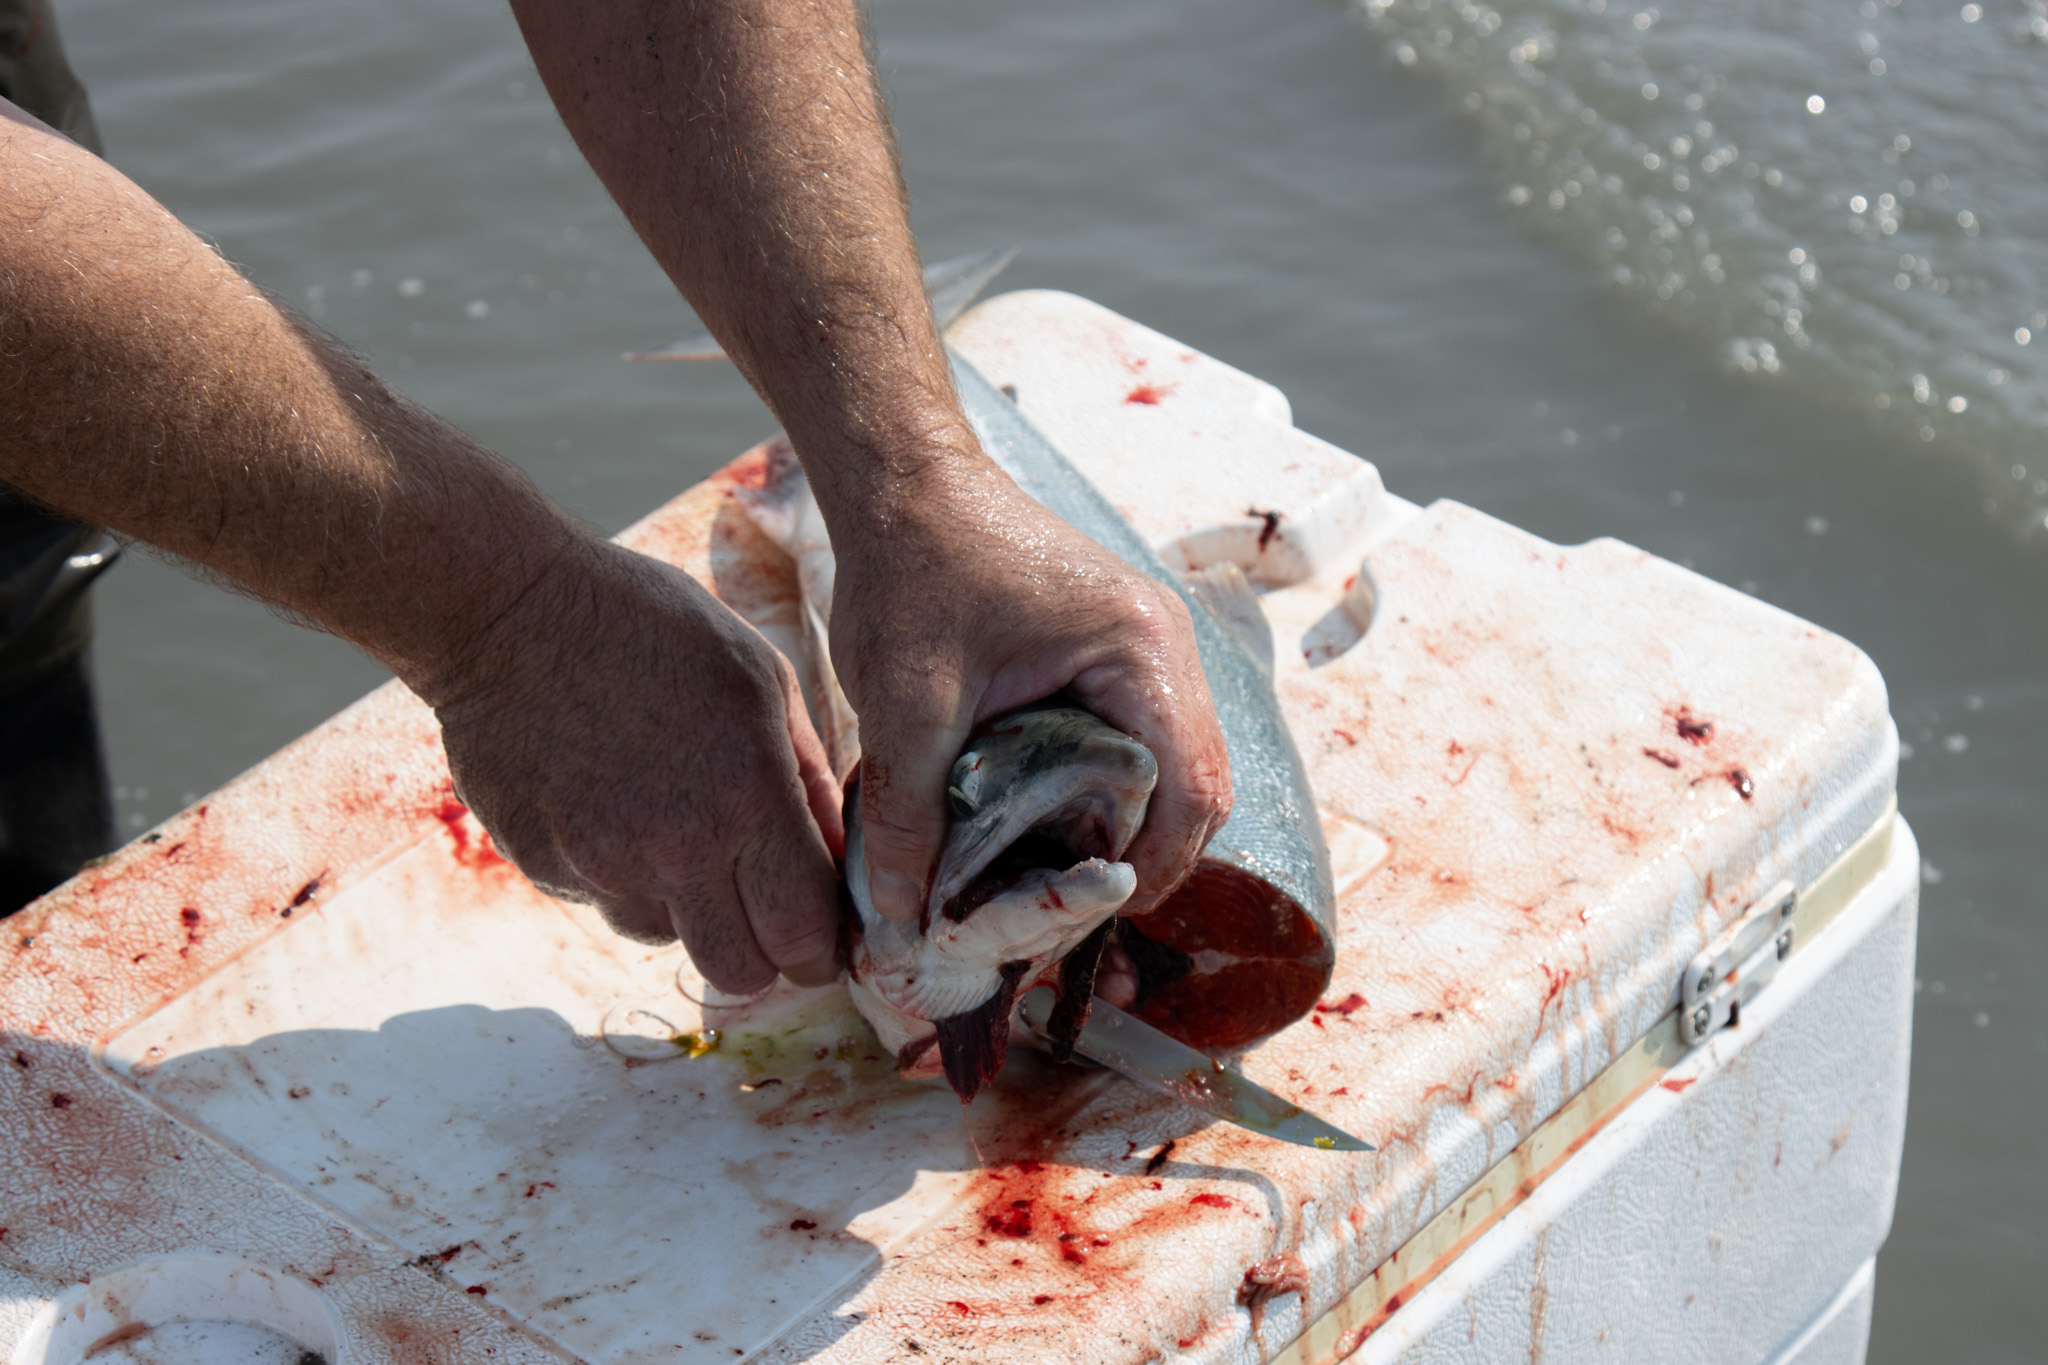 a close up of a mans hands as he cuts off the head of a fish on a white cooler covered in blood